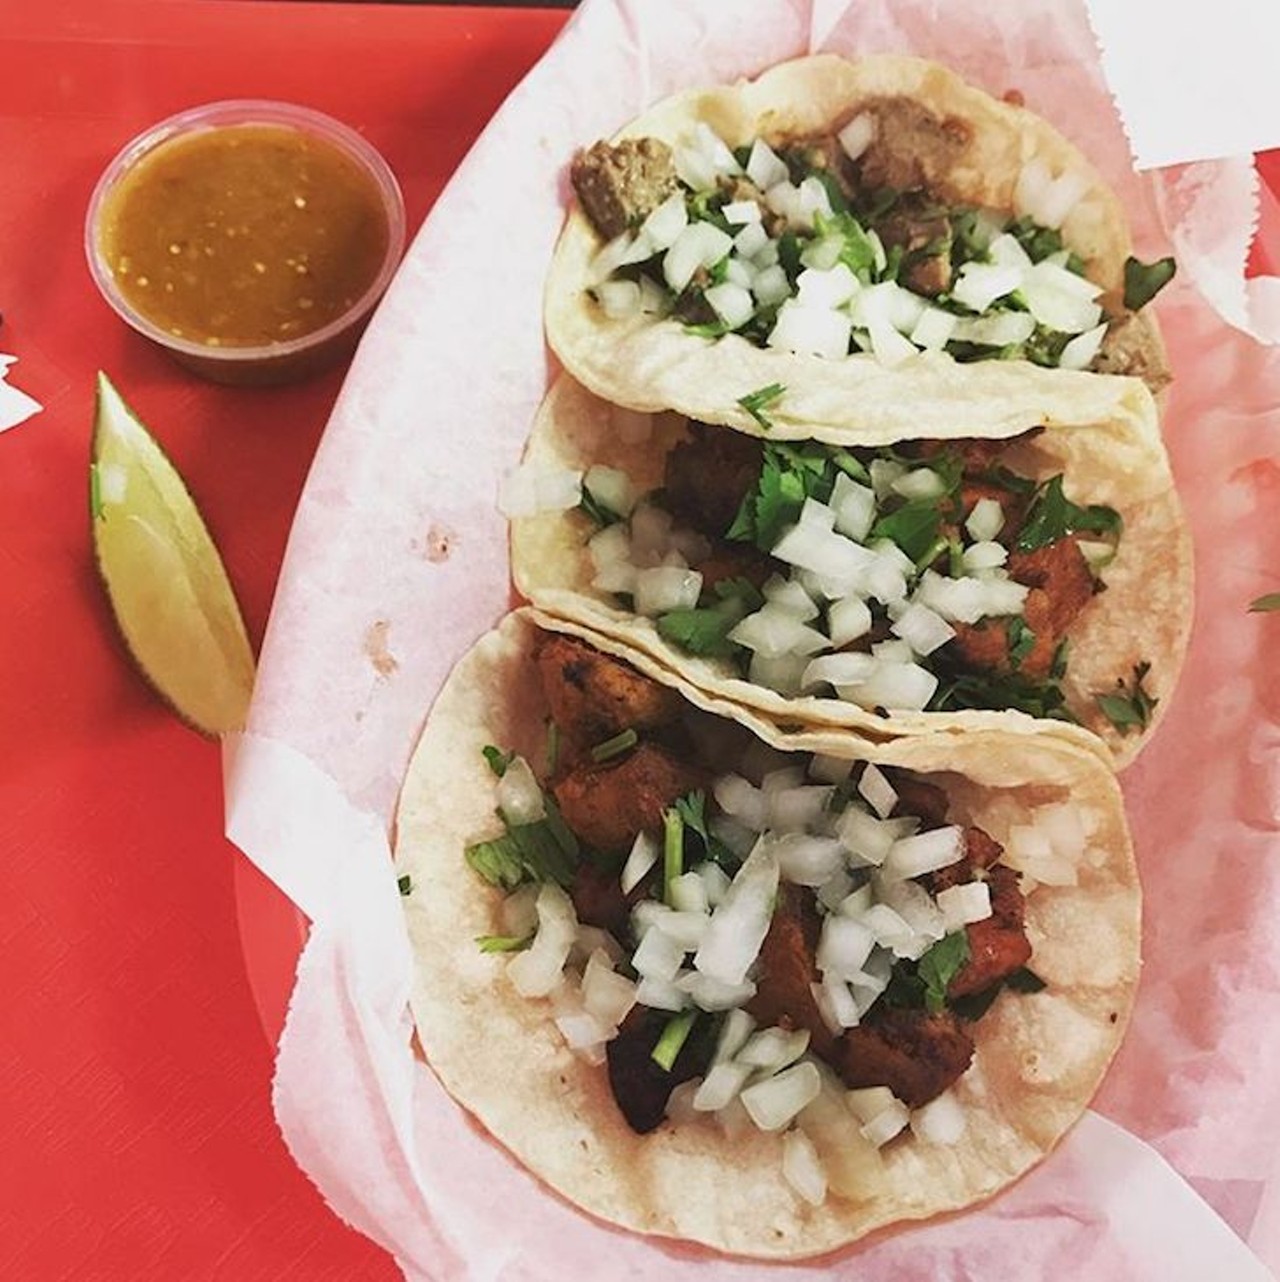 Taco&#146;s El Rancho
331 N Orange Ave, 407-849-0033
For a $2.66 taco with your choice of meat and any topping you&#146;d like, this deal can&#146;t be beat. Add on a side of rice and beans and you&#146;ve created yourself a meal of champions.
Photo via atsantana/Instagram